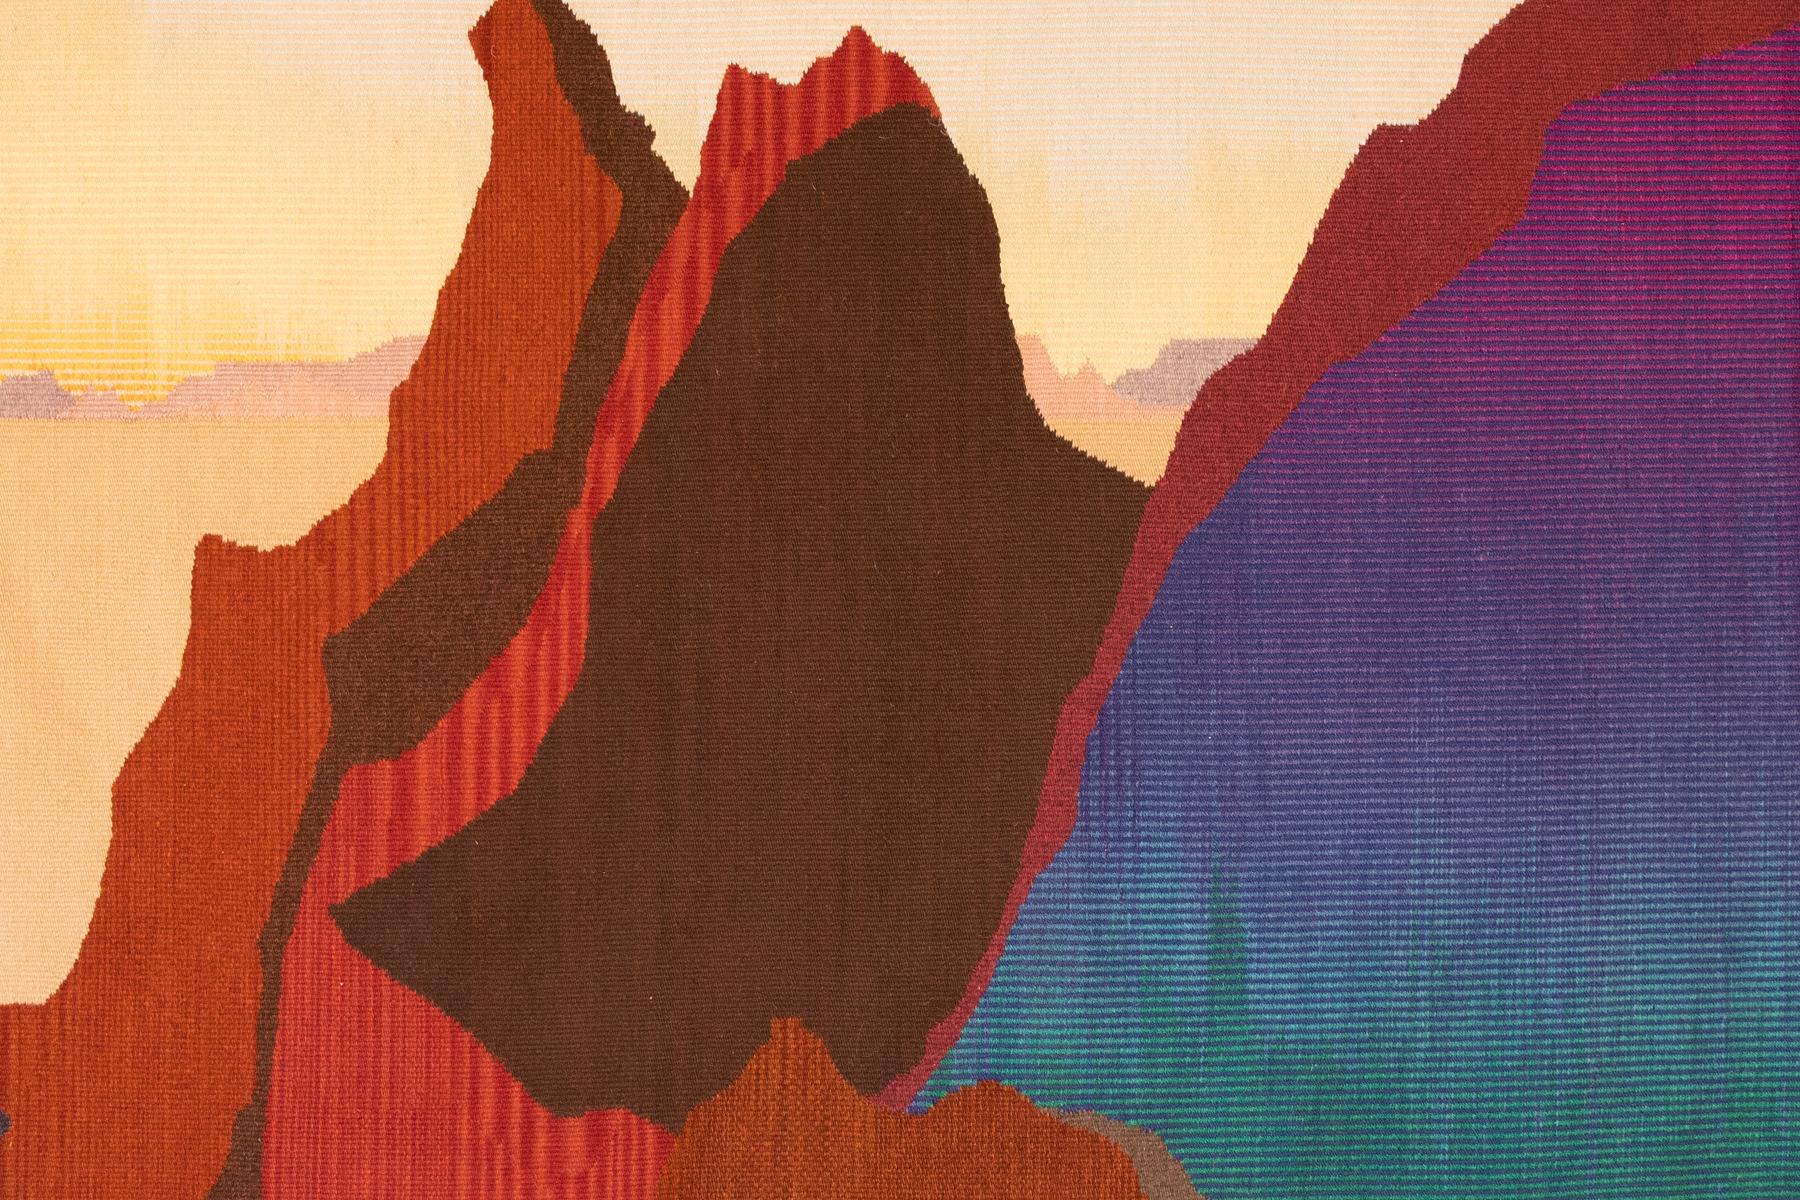 Remarkable over 12’ handwoven tapestry by American artist Janet Taylor depicting red canyon mountain ranges with a distant light yellow sunset along the horizon line. The right quadrant of the composition reflects deeper night approaching with